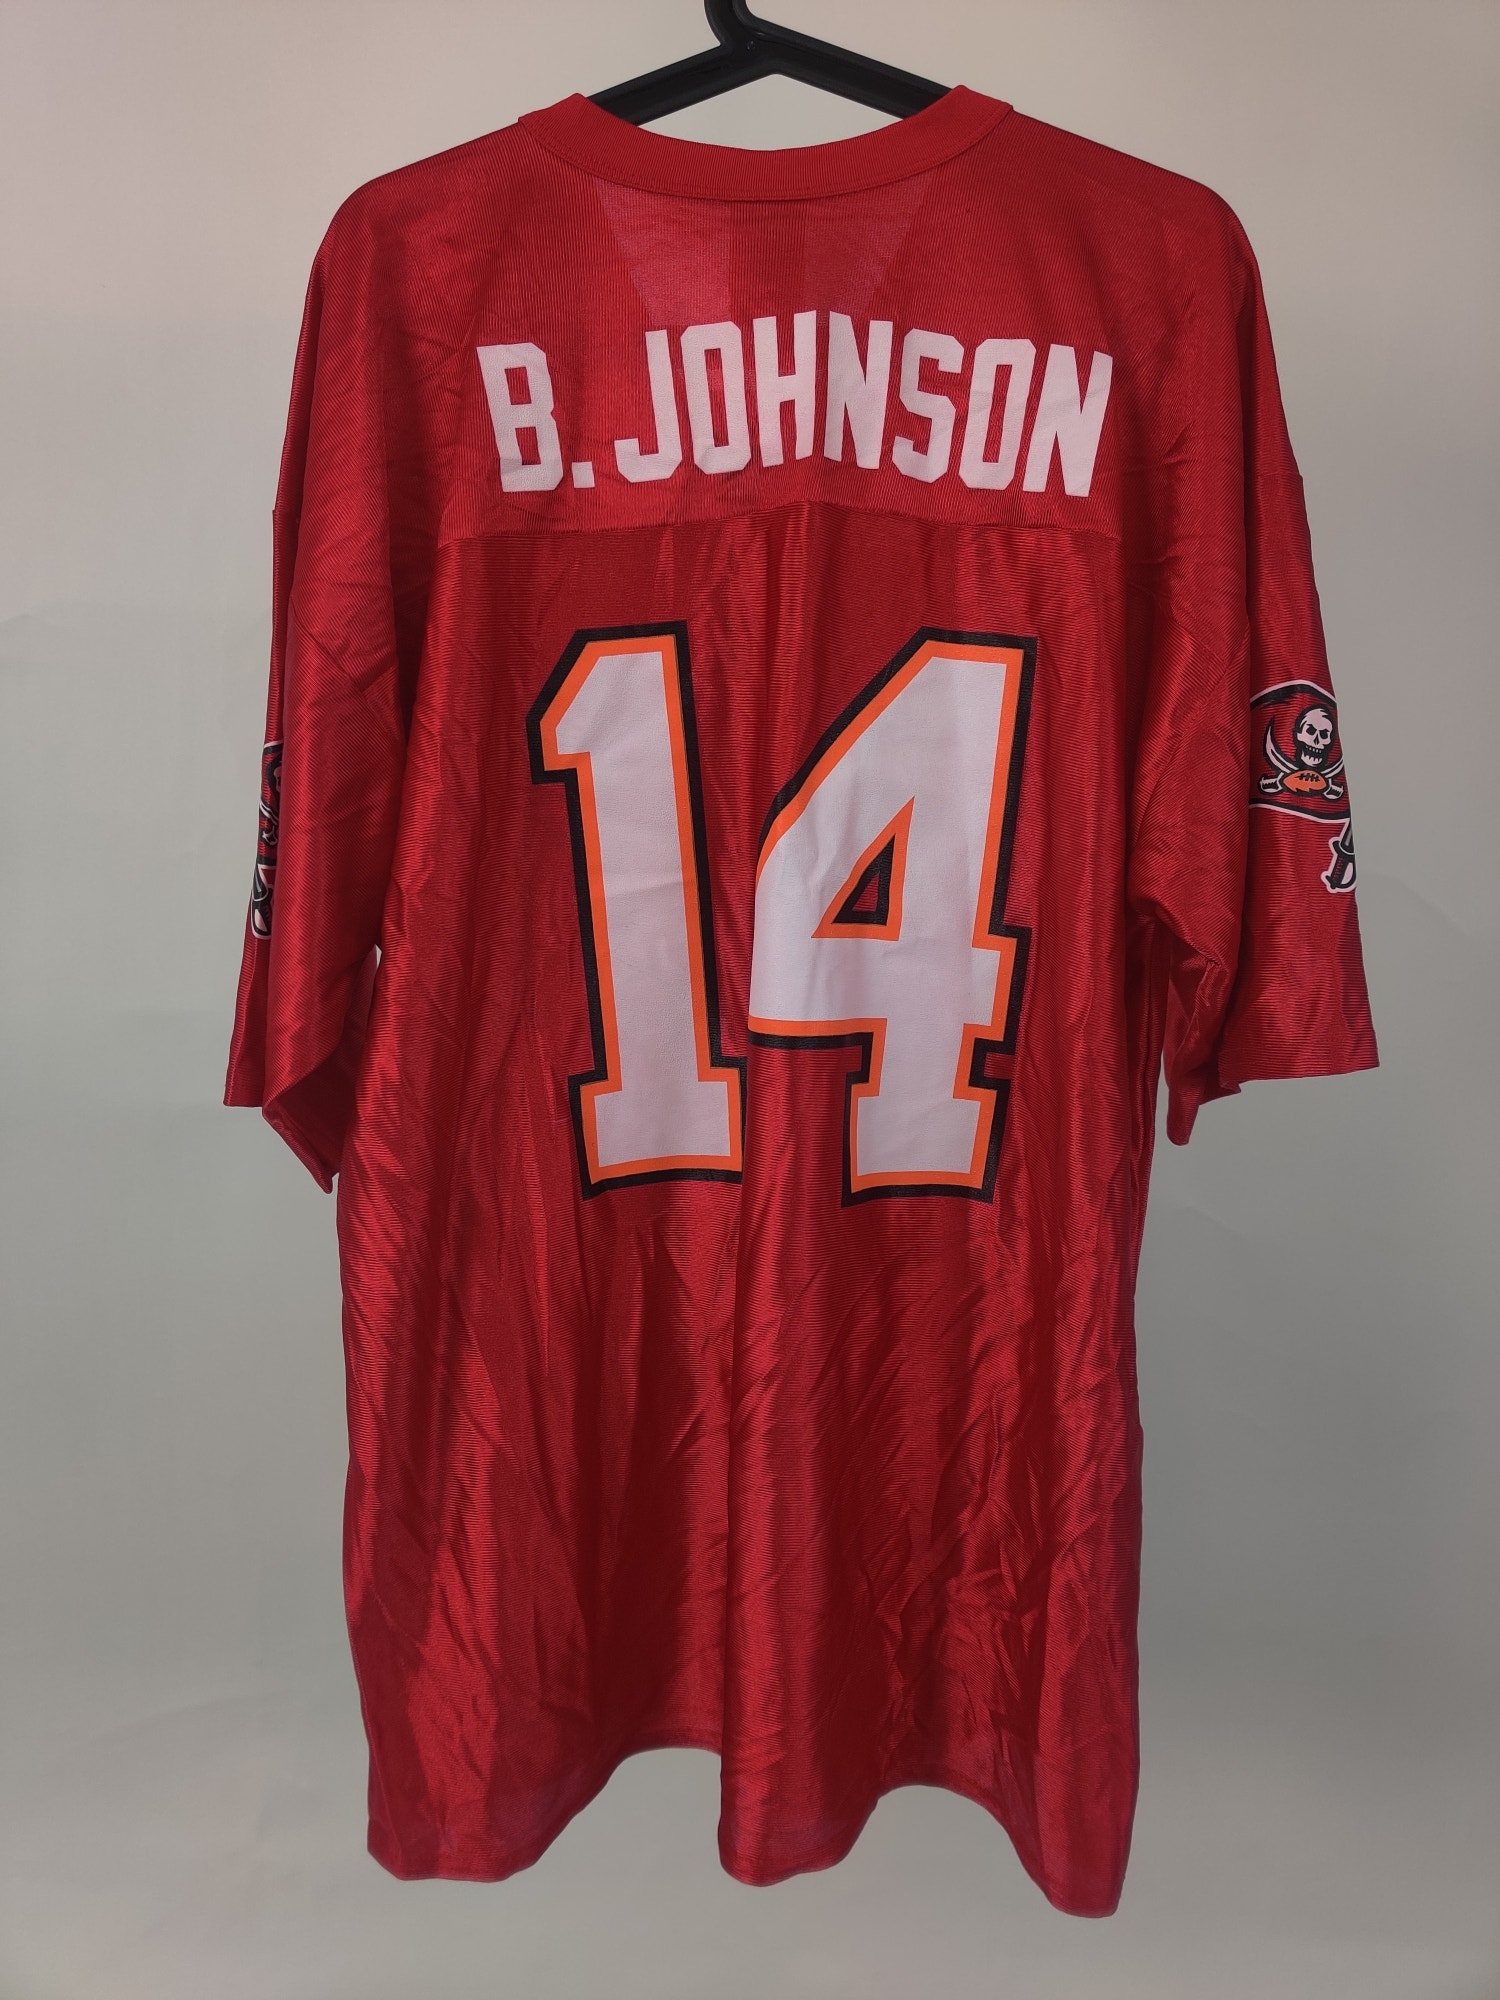 (V)NEW Tampa Bay Buccaneers B. Johnson #14 NFL Jersey Men’s XL - Picture 7 of 9